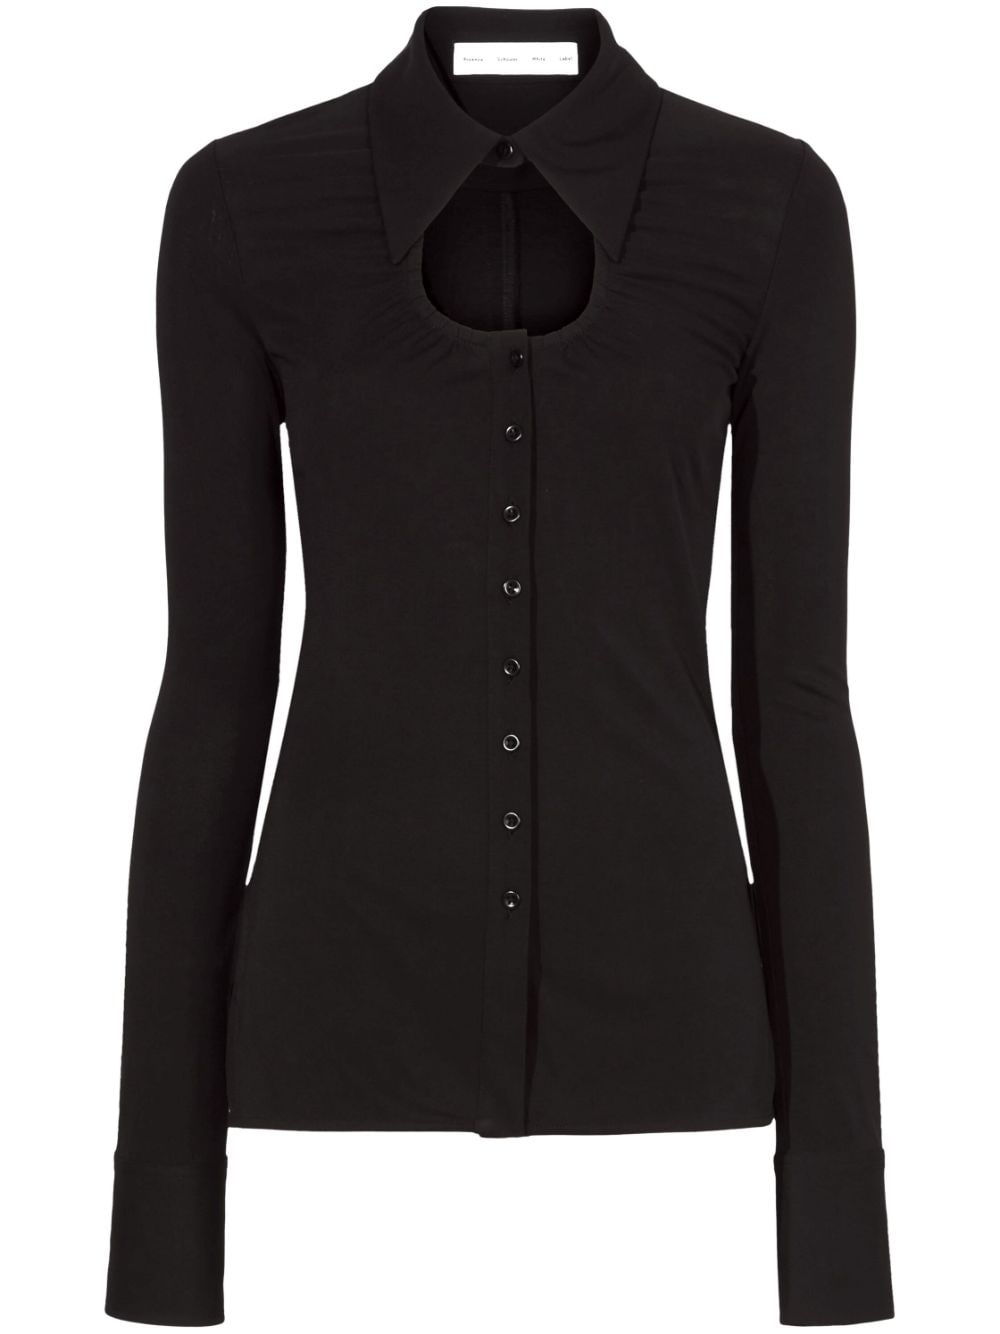 cut-out detail ruched shirt - 1